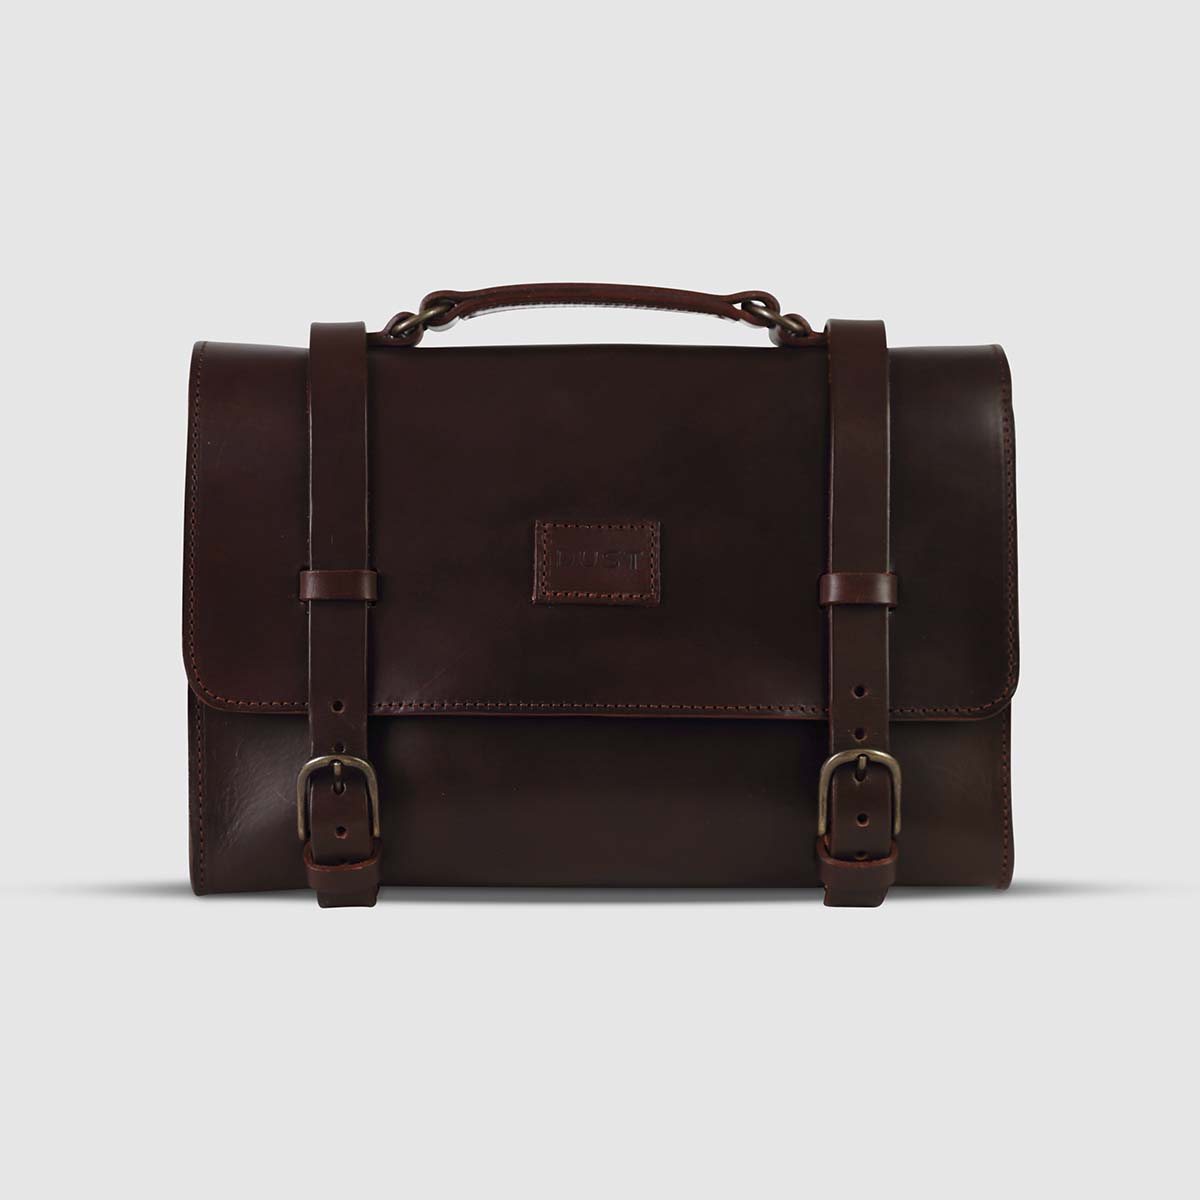 The Dust Company Minimalist Leather Briefcase